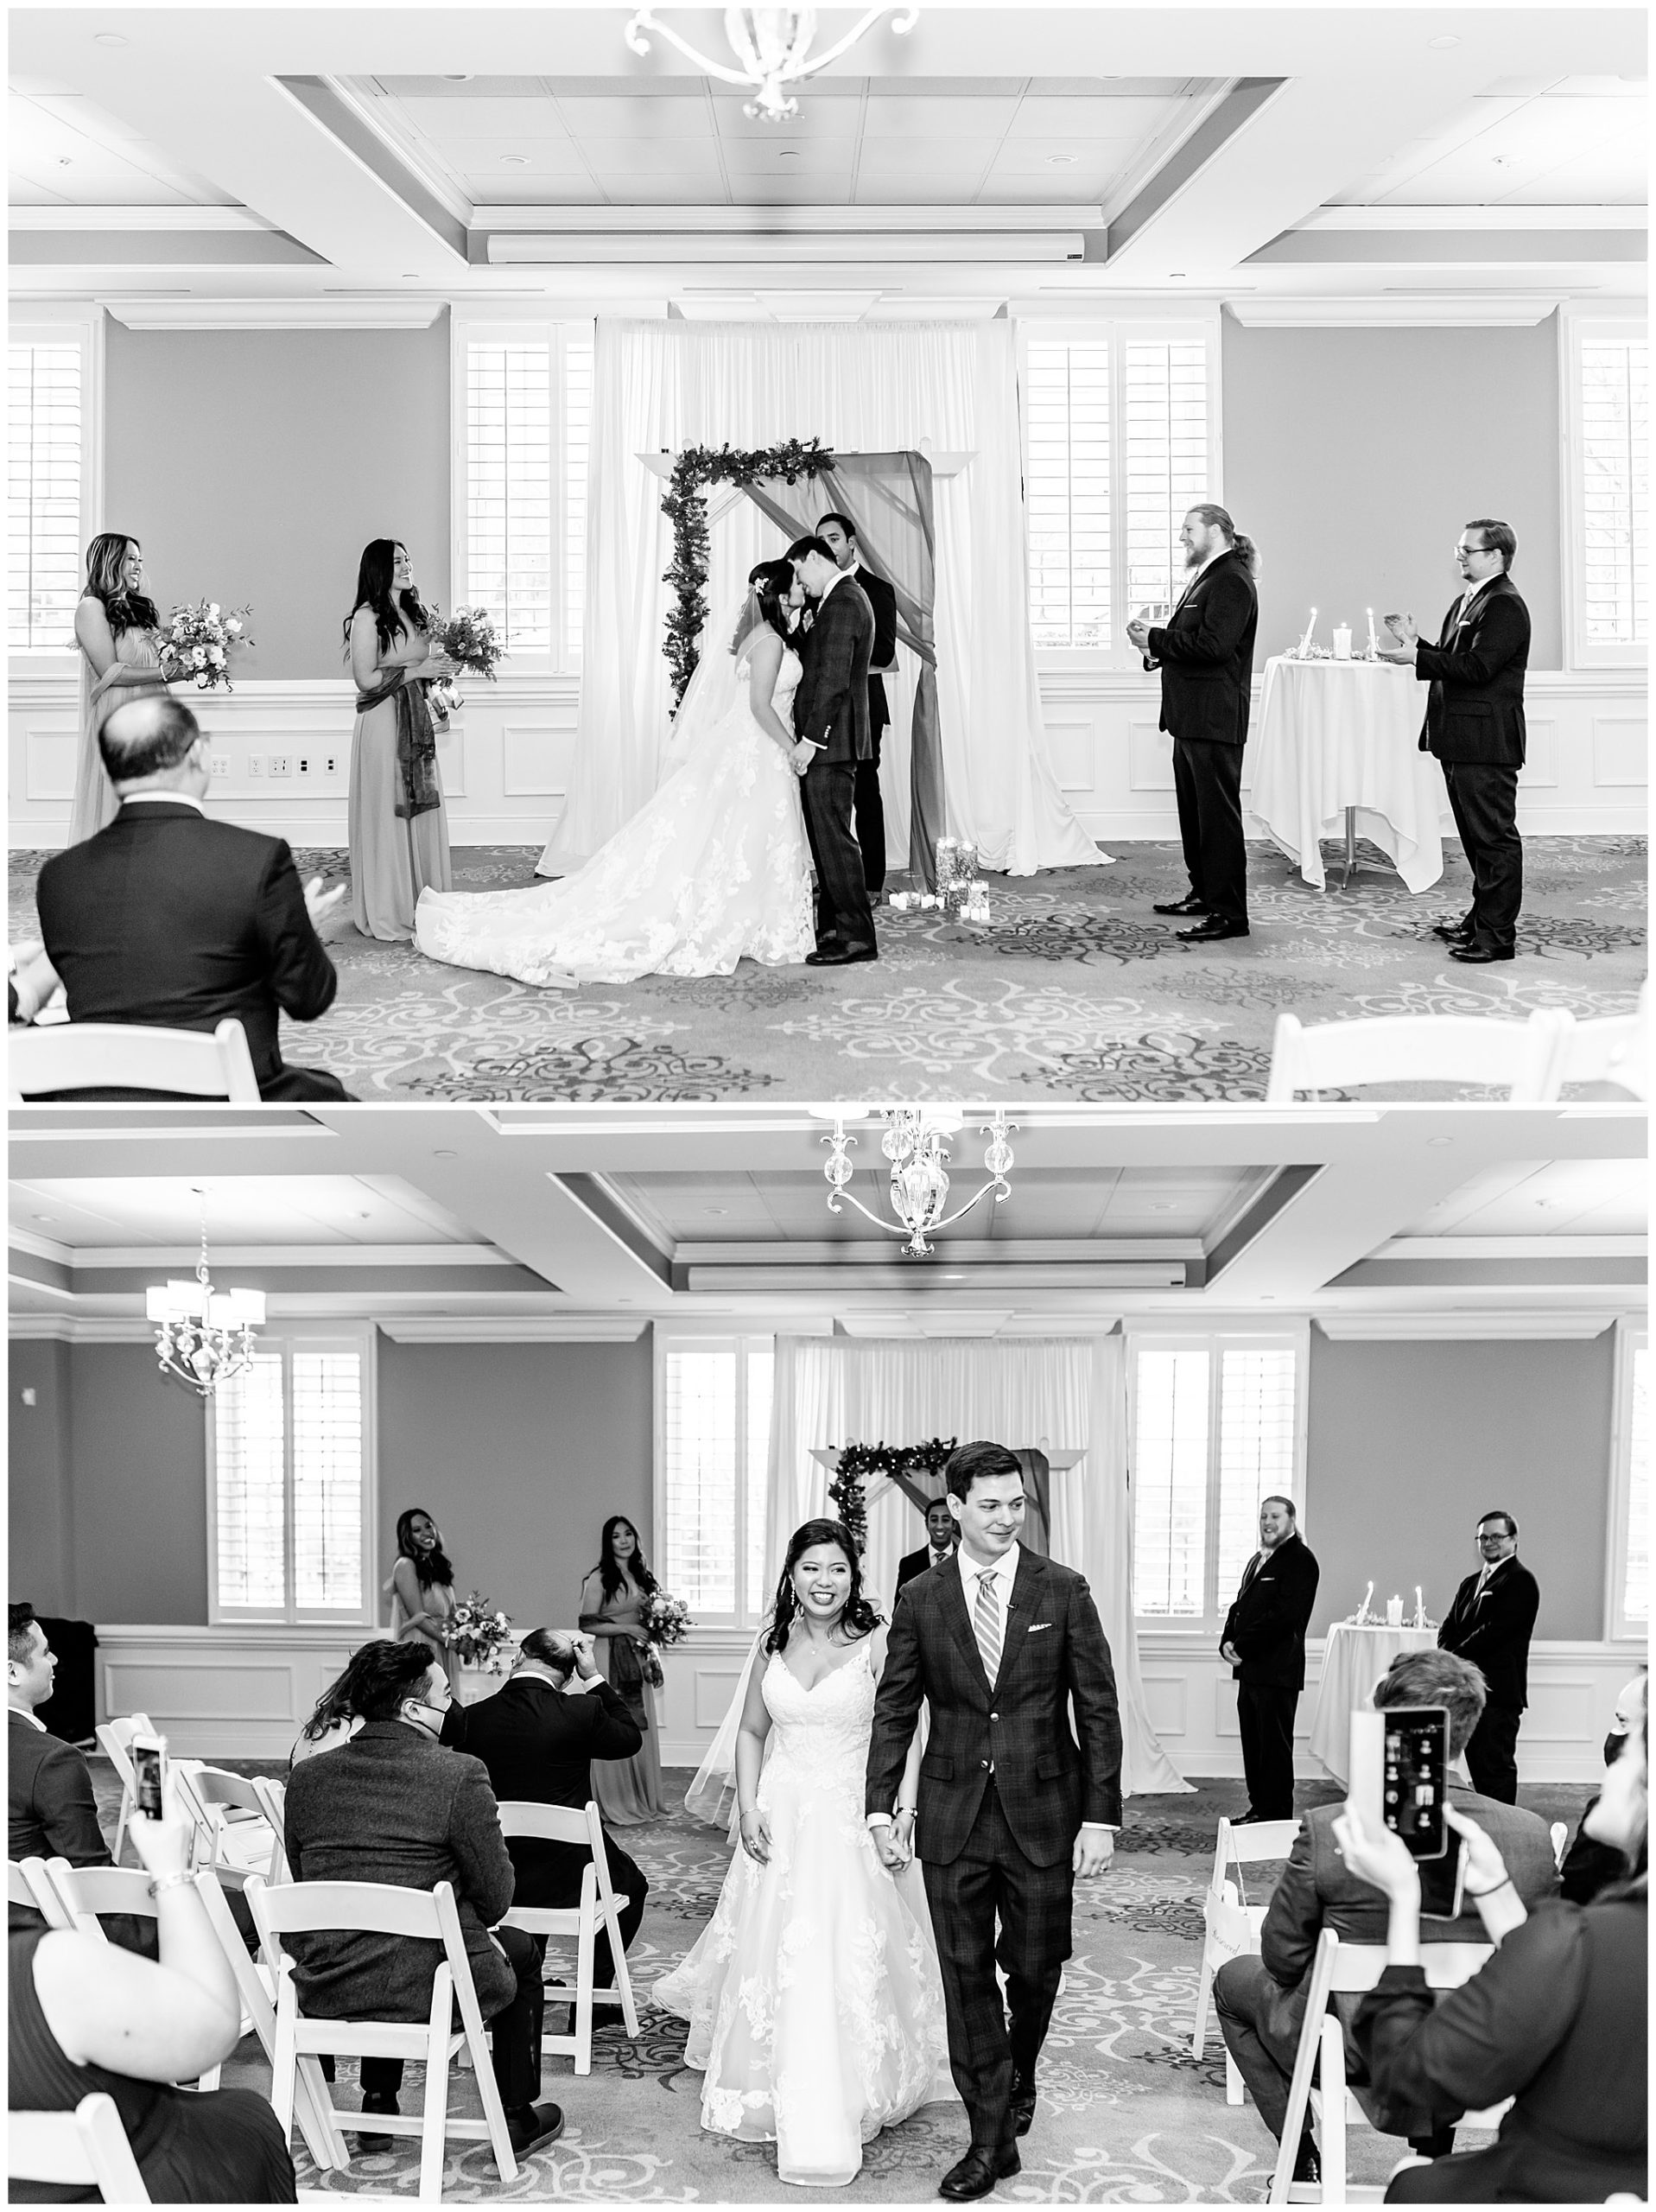 Regency at Dominion Valley wedding, Virginia country club wedding, Haymarket Virginia wedding, northern Virginia wedding, winter wedding, winter wedding aesthetic, DC micro wedding, northern Virginia wedding venues, classic winter wedding, Rachel E.H. Photography, Simer, black and white, bride and groom kissing at alter, bride and groom walking down aisle